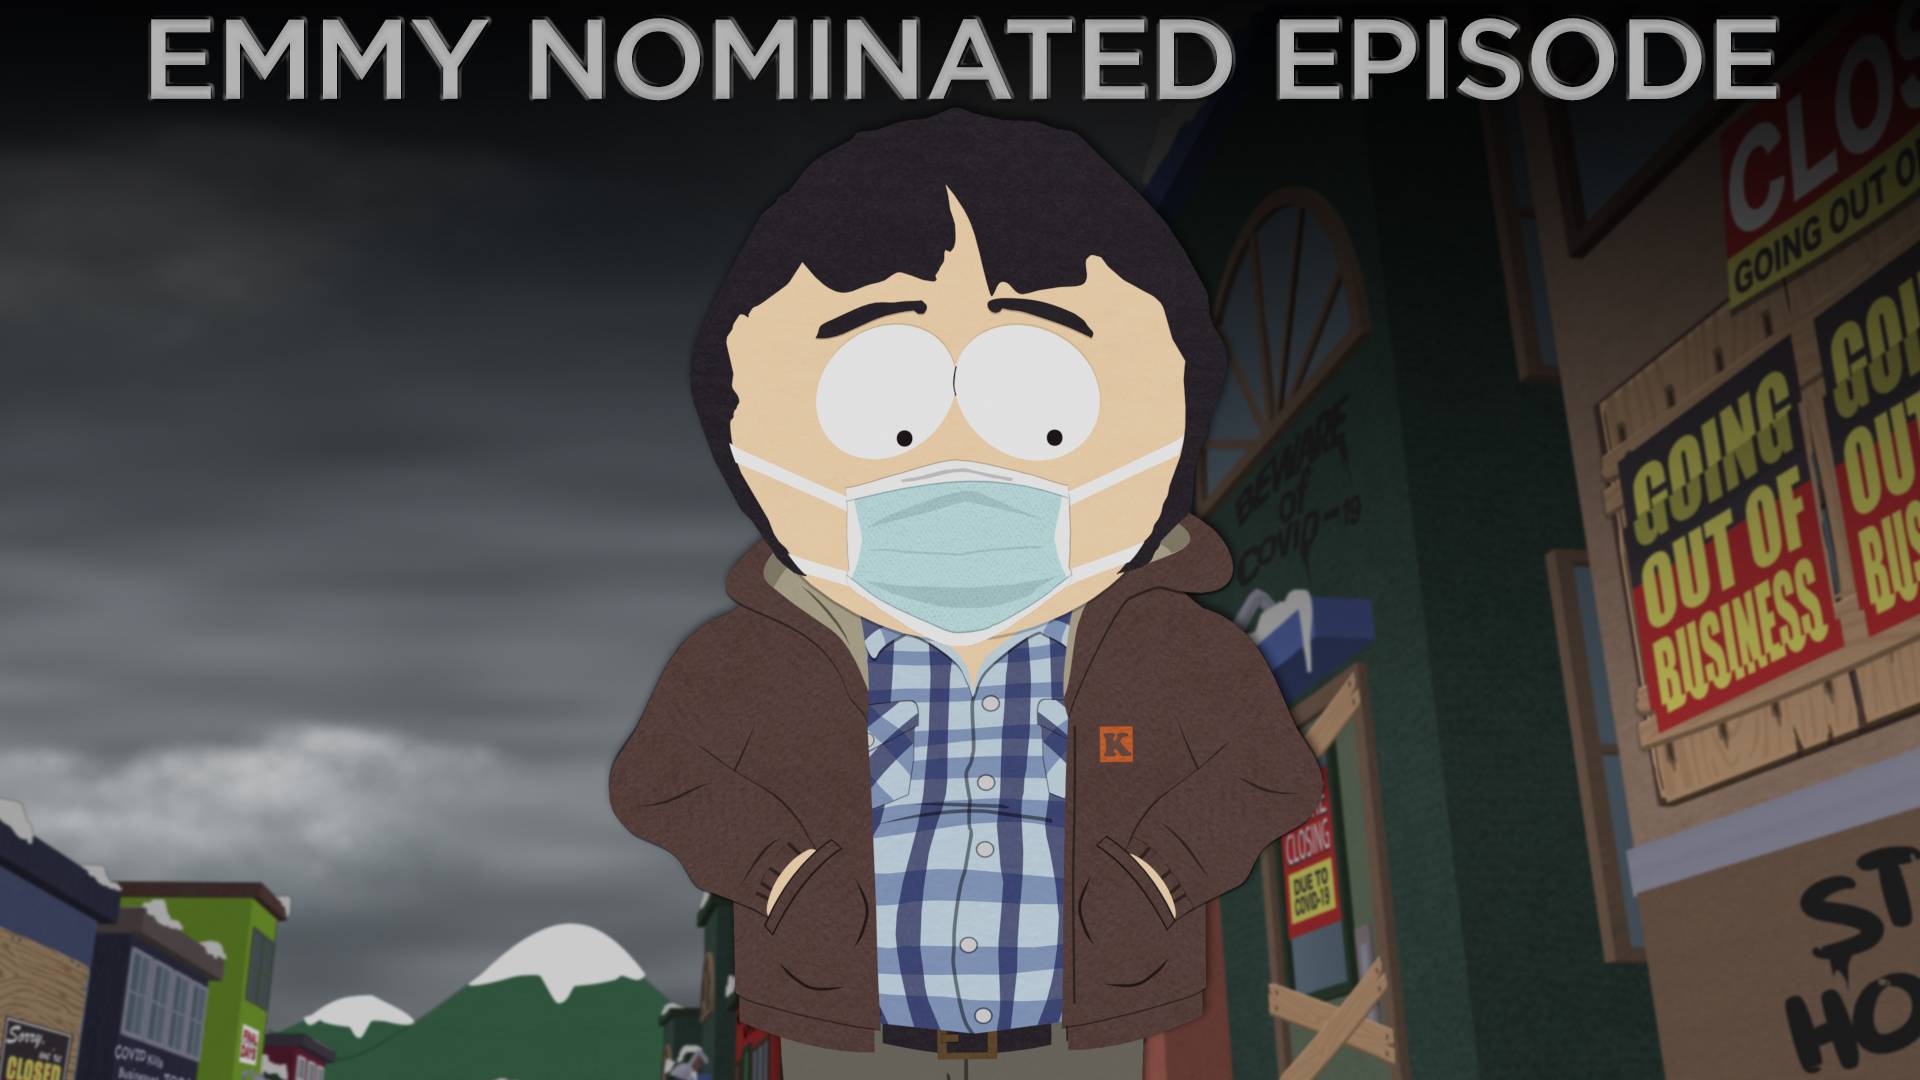 South Park, Series 26, Episode 2 First Look